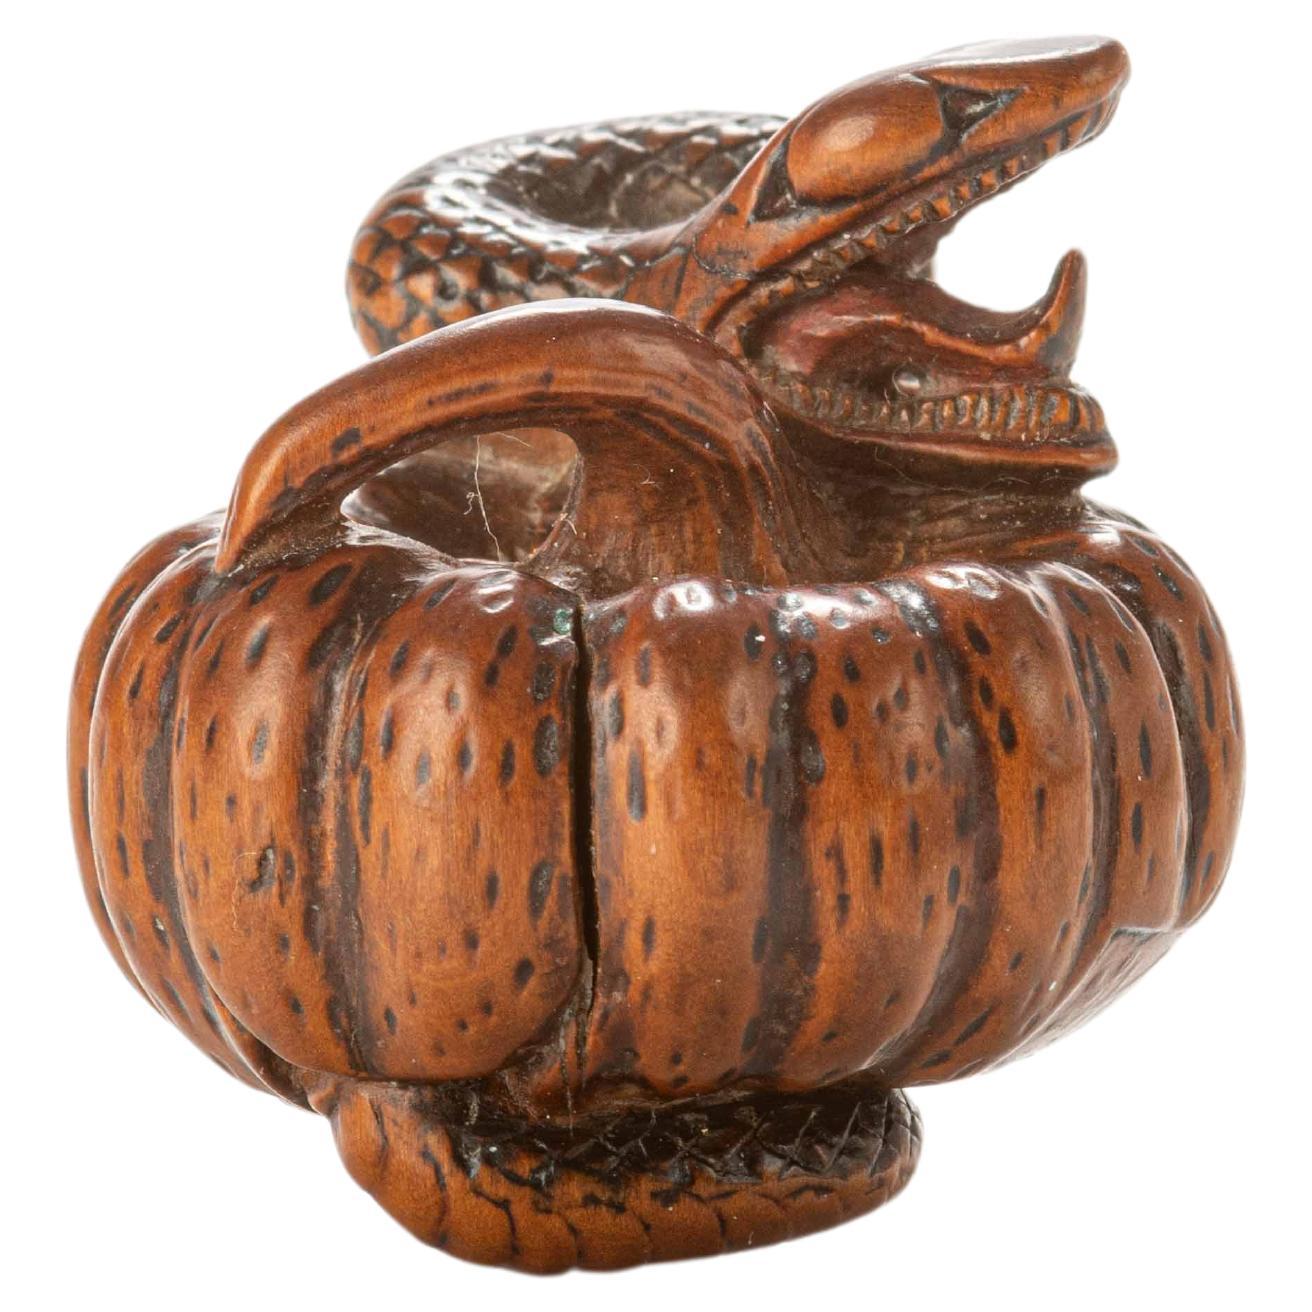 A boxwood netsuke depicting a snake wrapping around a pumpkin For Sale